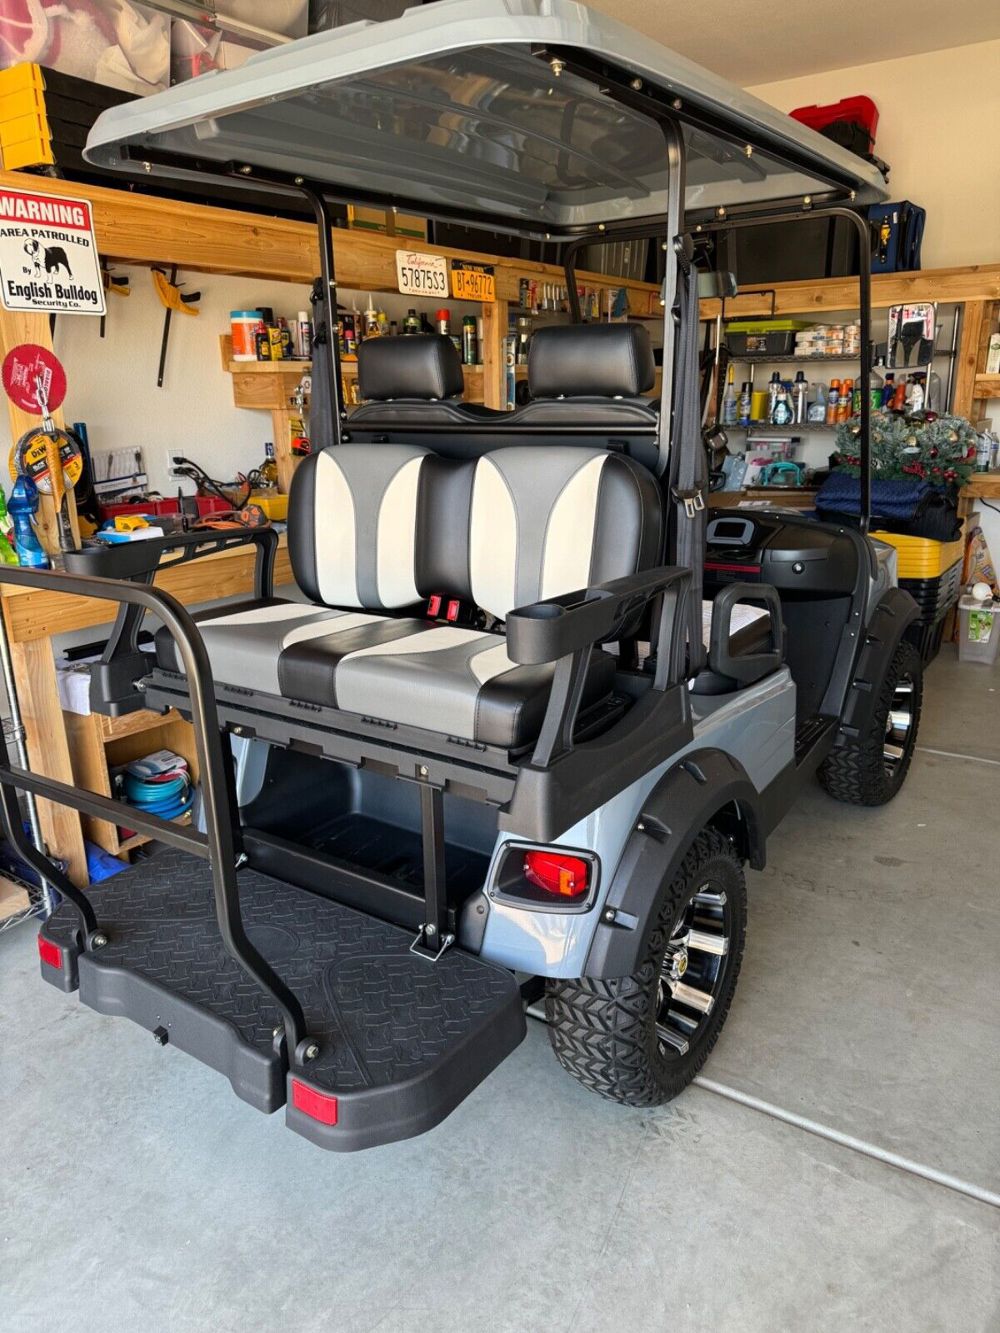 Golfcart for players